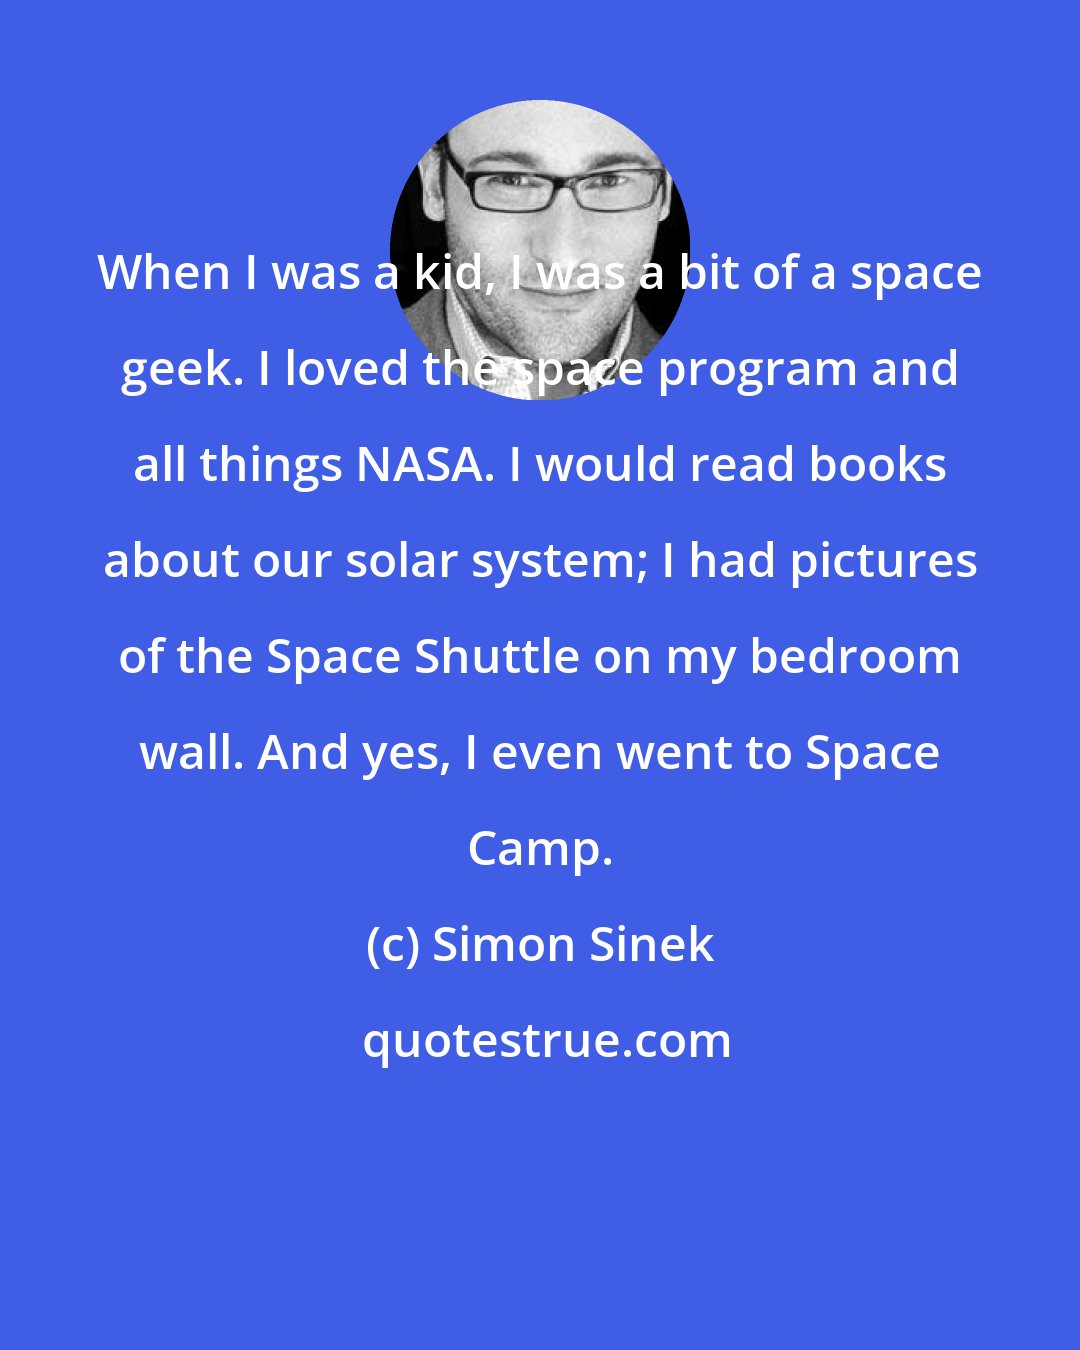 Simon Sinek: When I was a kid, I was a bit of a space geek. I loved the space program and all things NASA. I would read books about our solar system; I had pictures of the Space Shuttle on my bedroom wall. And yes, I even went to Space Camp.